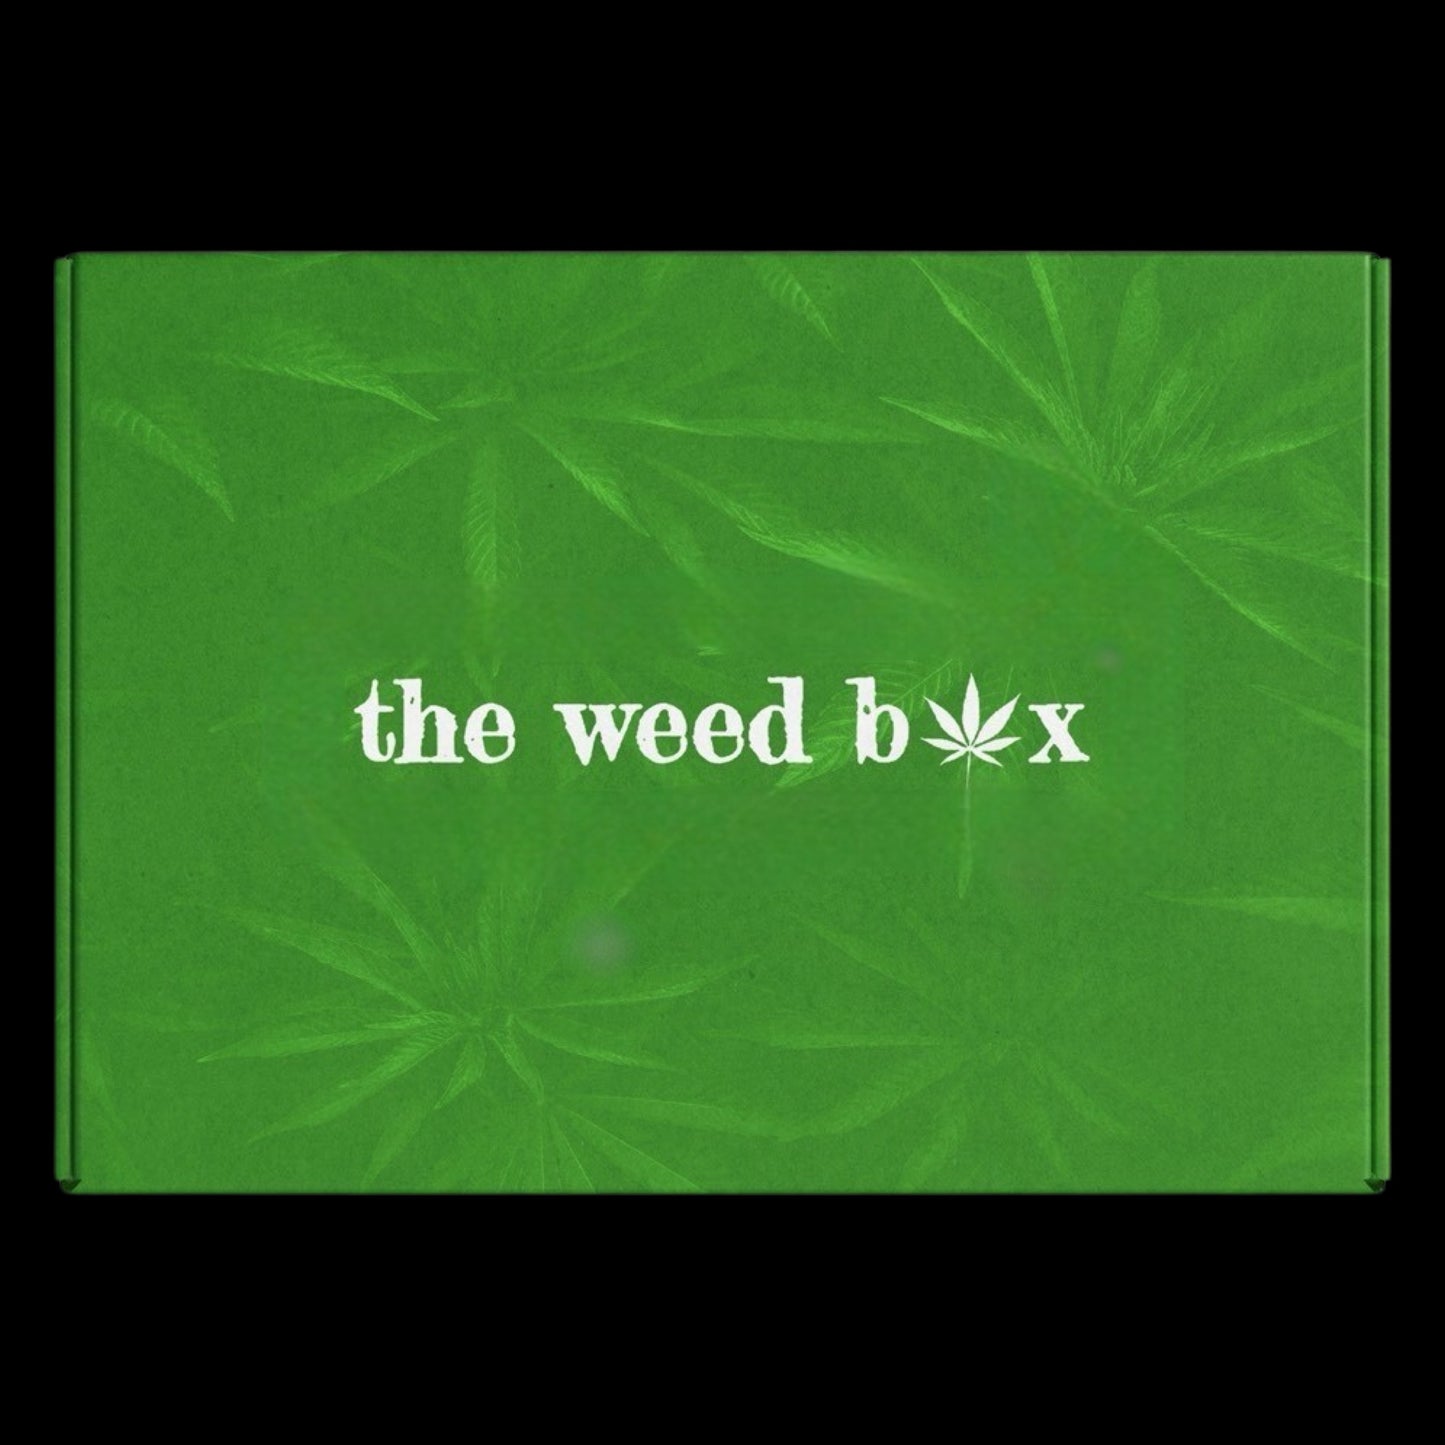 Weed subscription box